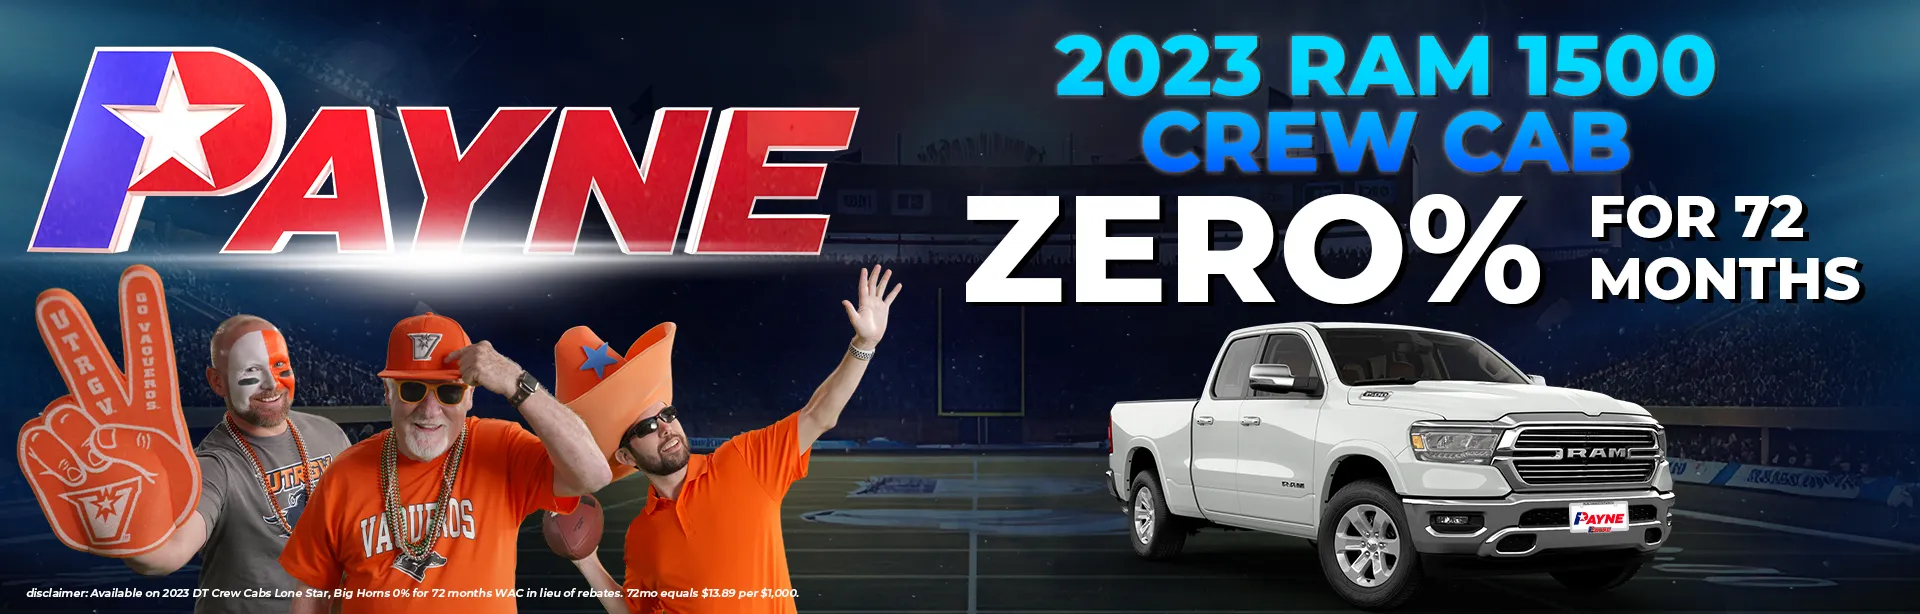 2023 RAM 1500 Crew Cab for 0% for 72 months